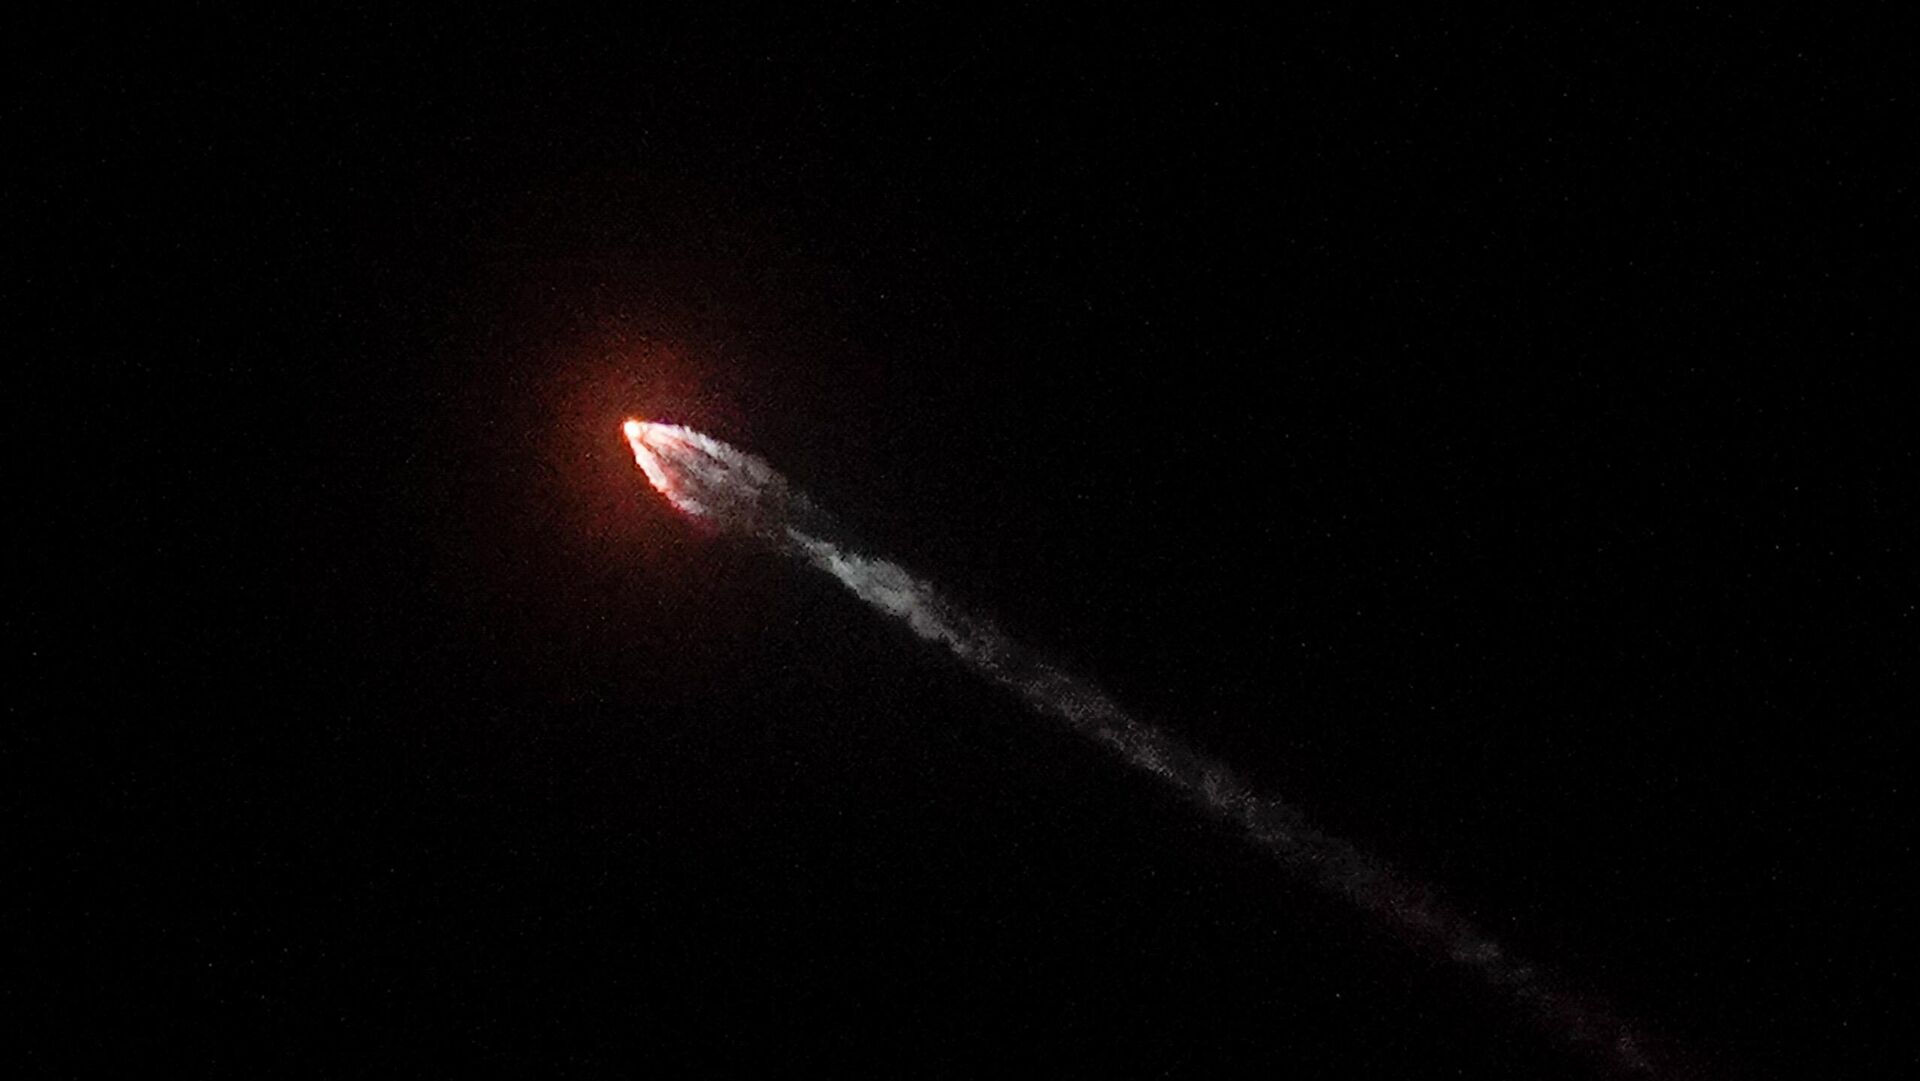 The DART spacecraft, short for Double Asteroid Redirection Test, atop a SpaceX Falcon 9 rocket is seen Tuesday, Nov. 23, 2021, from Simi Valley, Calif. after launching from Vandenberg Space Force Base. - Sputnik International, 1920, 22.09.2022